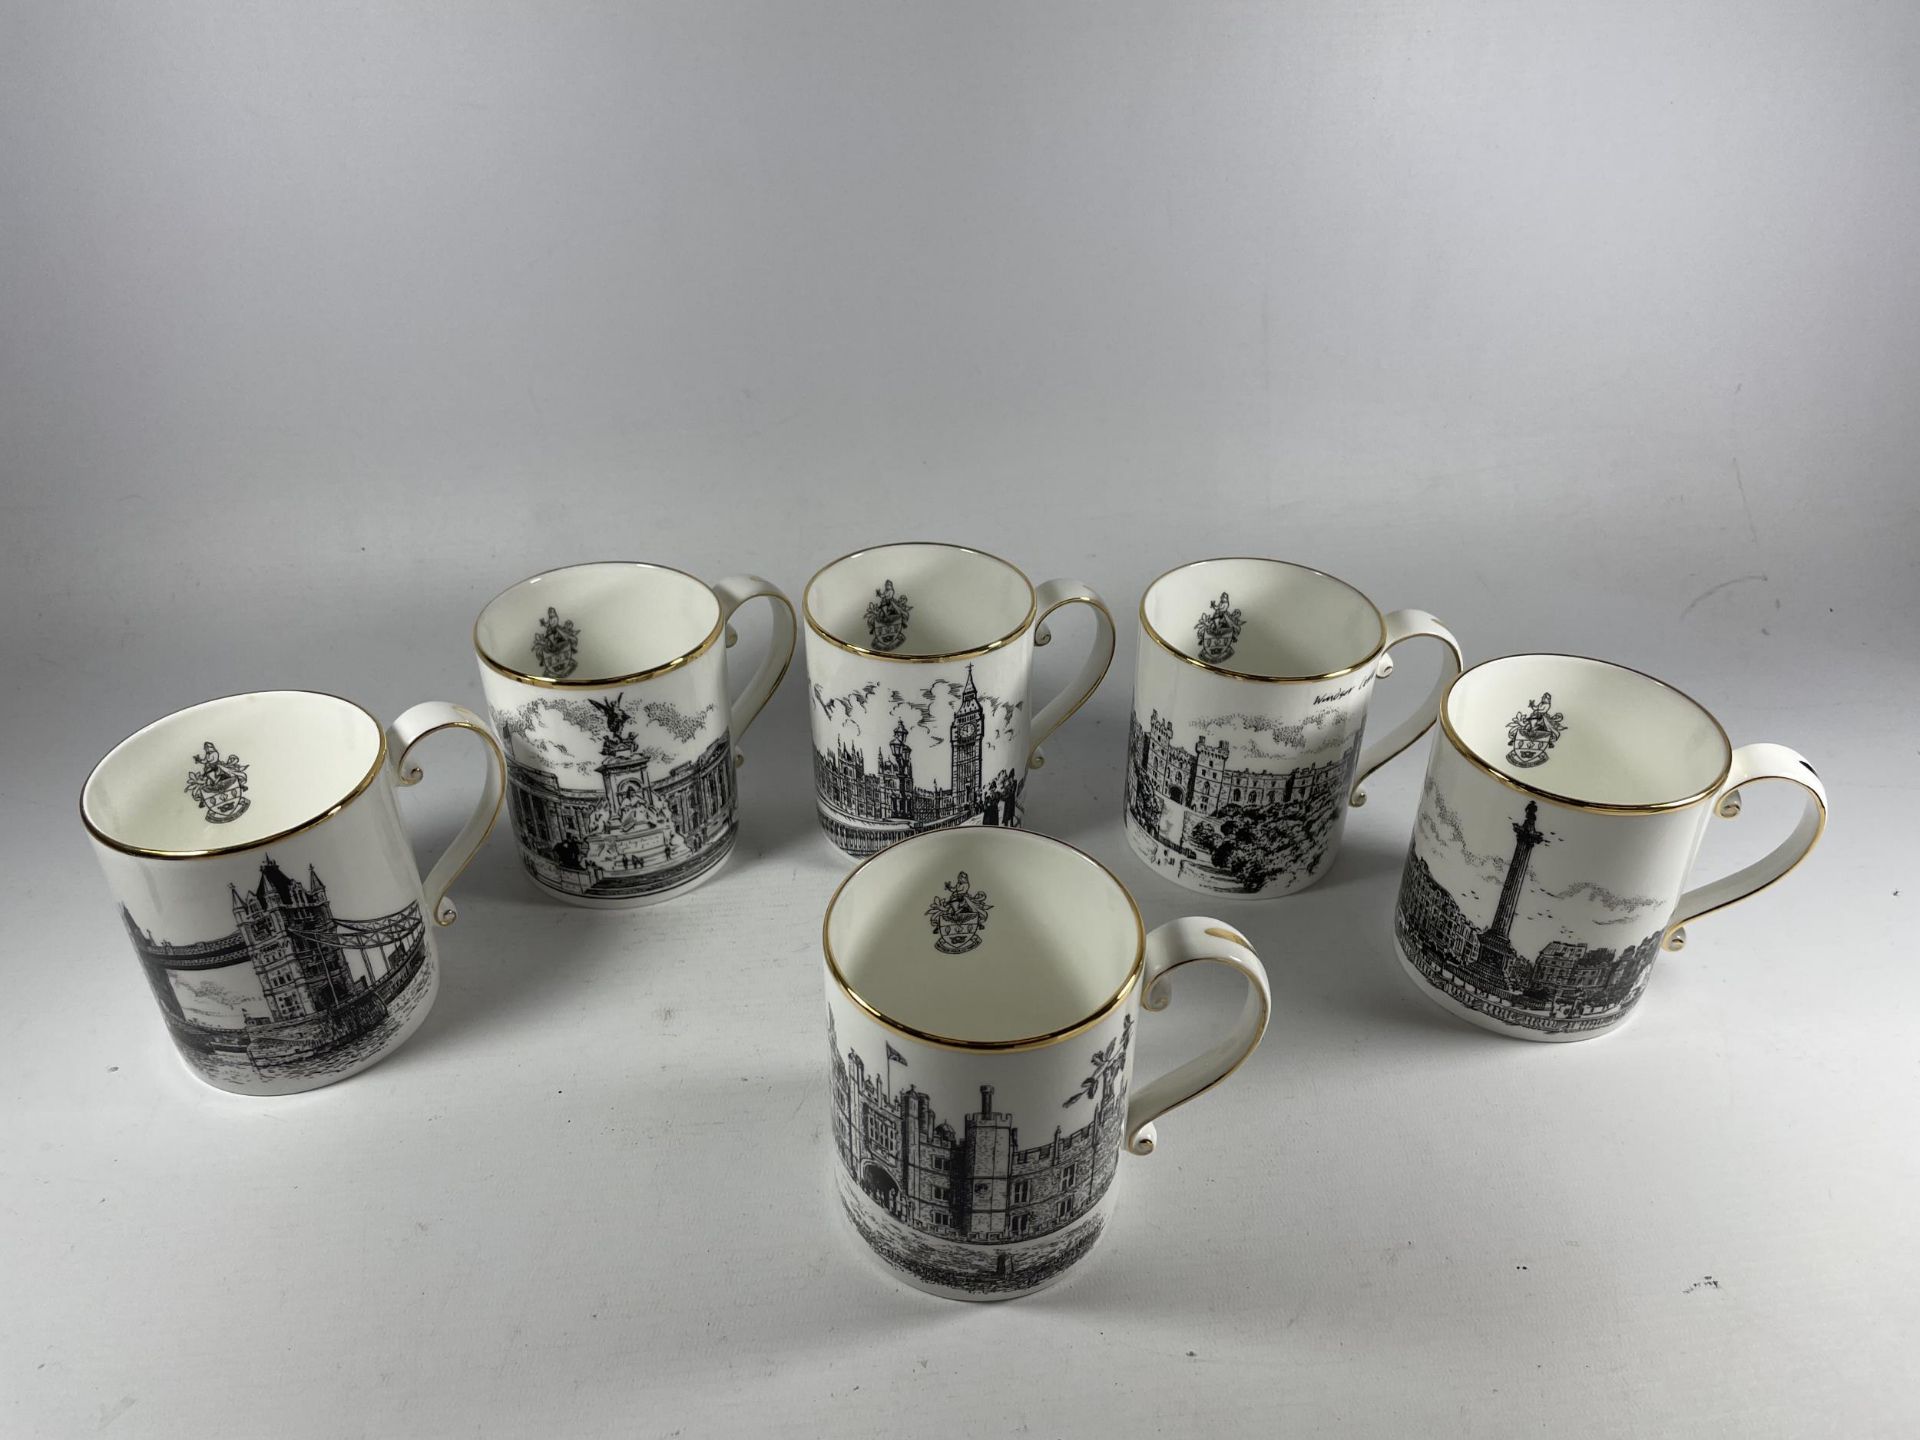 SIX GOODWIN CHINA CUPS WITH SCENES OF LONDON - Image 2 of 4